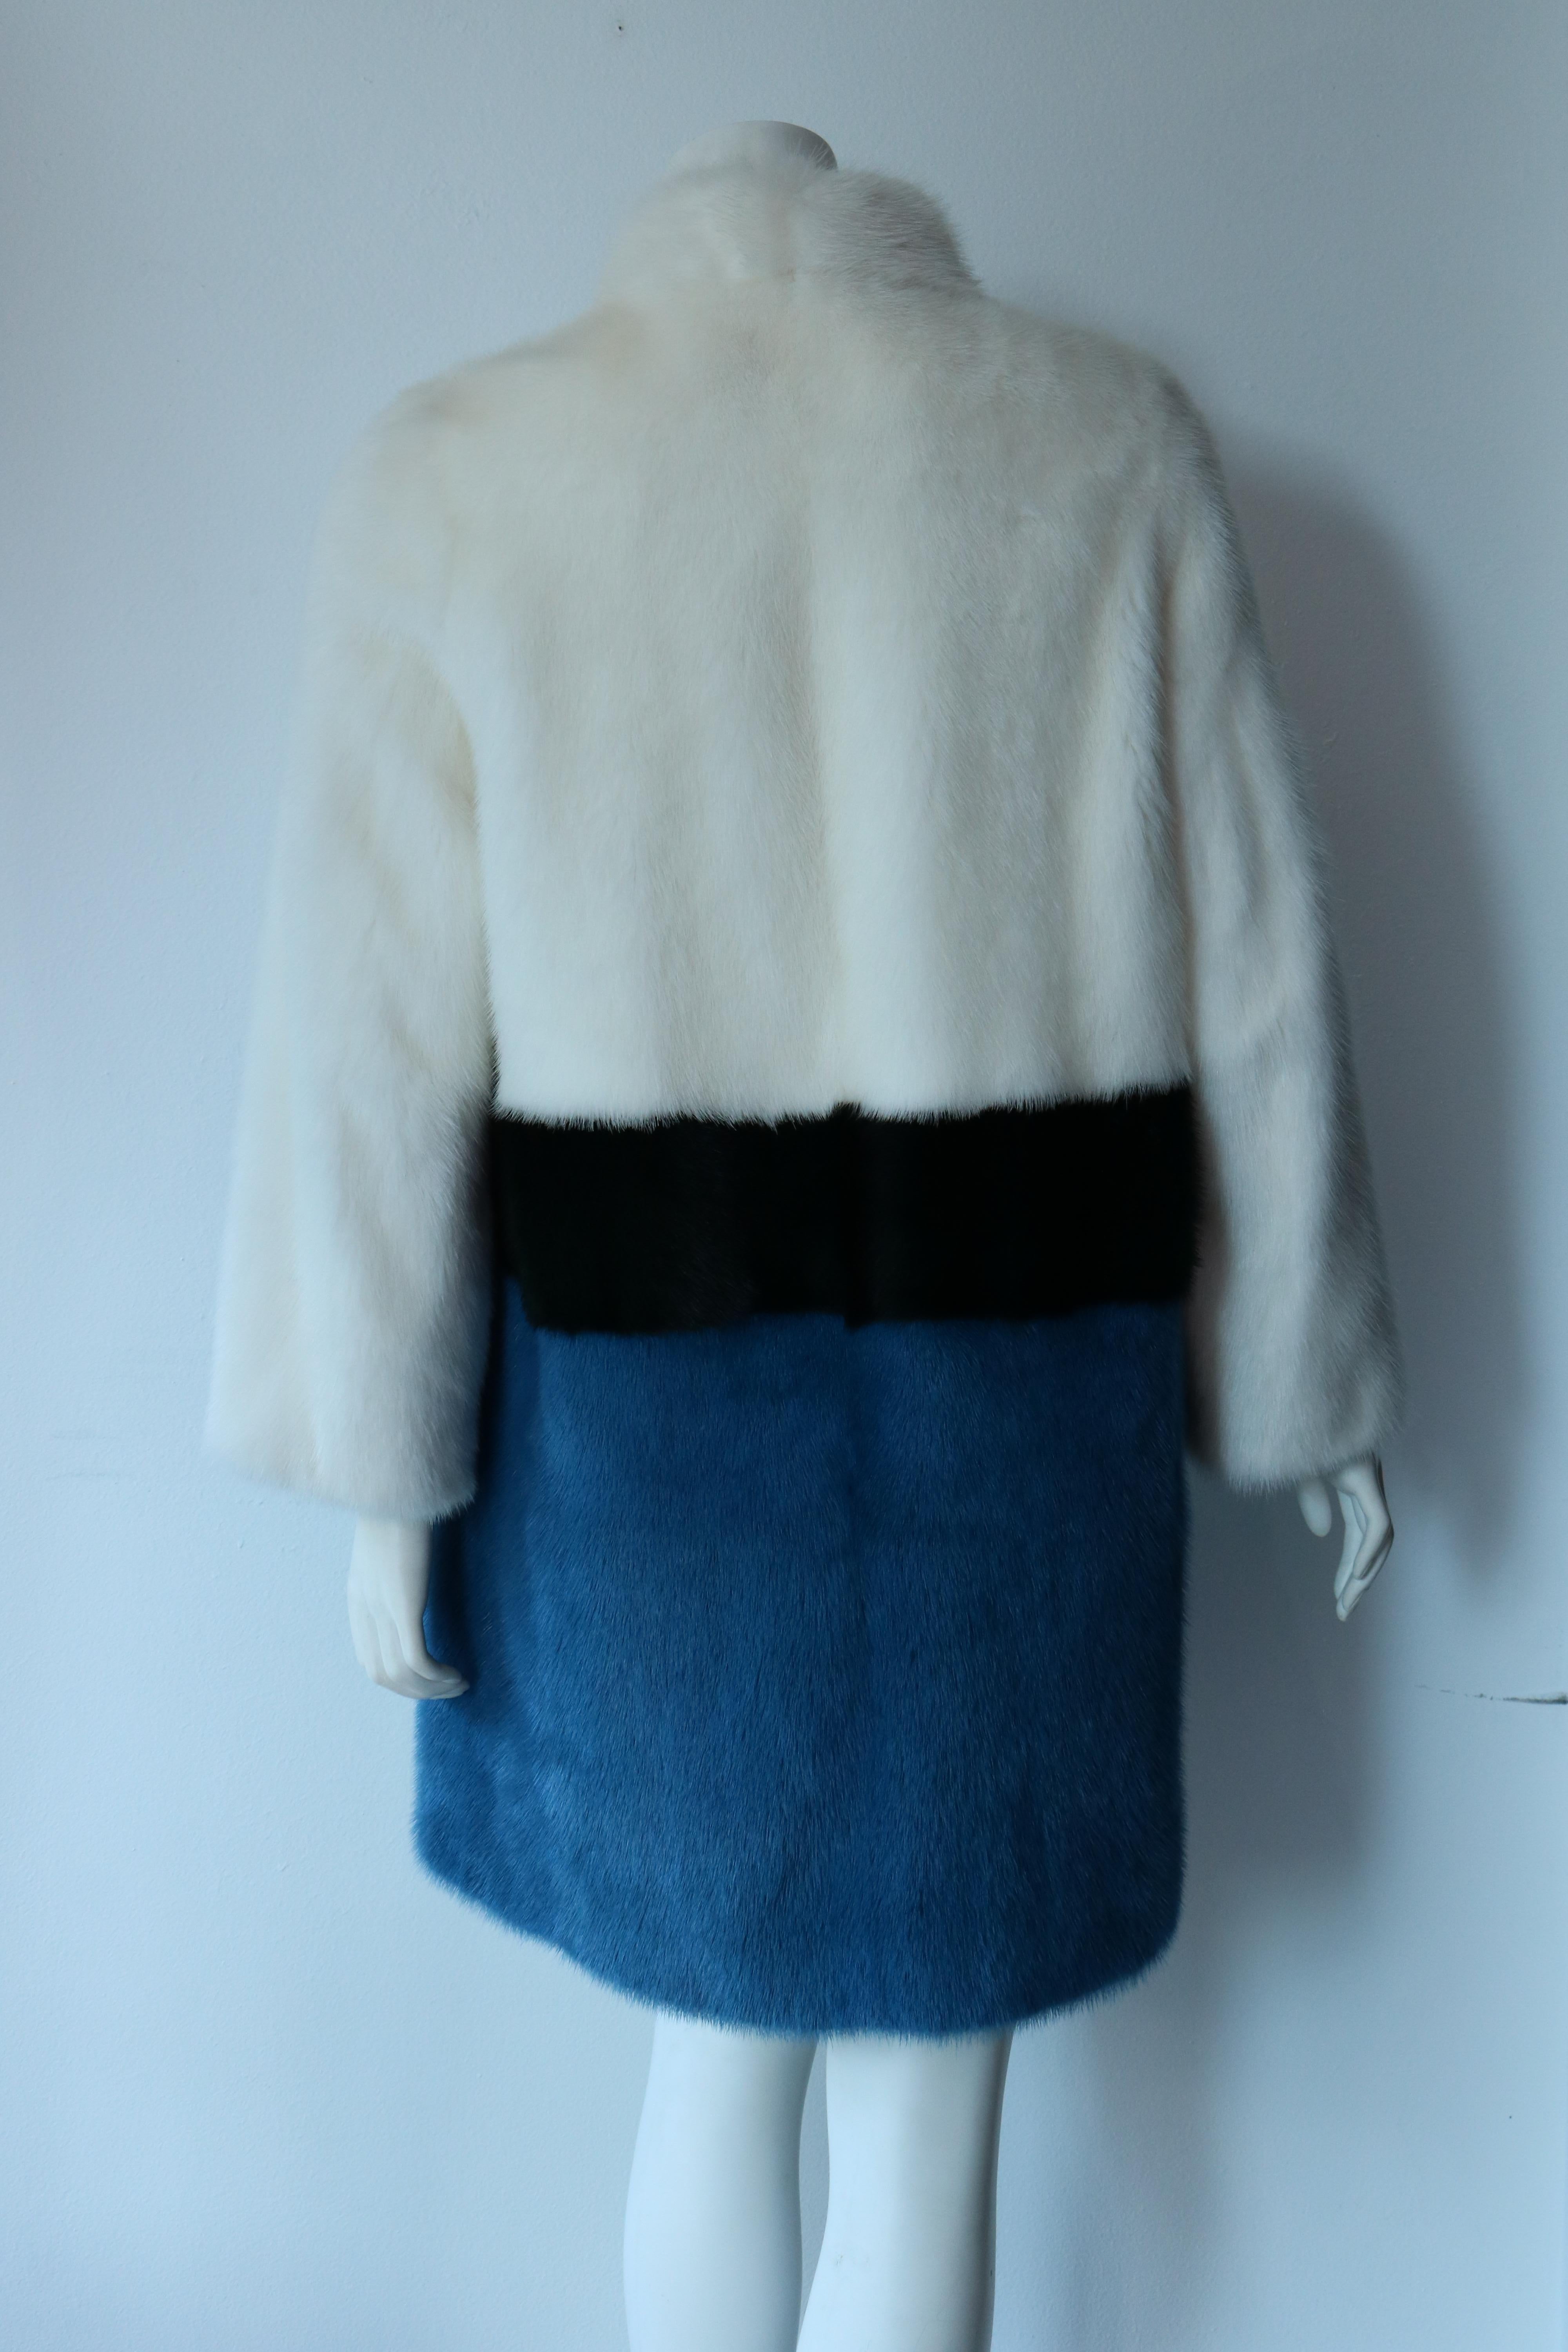 Algo white, blue and black mink fur coat with zipper. 
Pristine condition, never owned. 
Midi-length and silk lined. 
Size M
